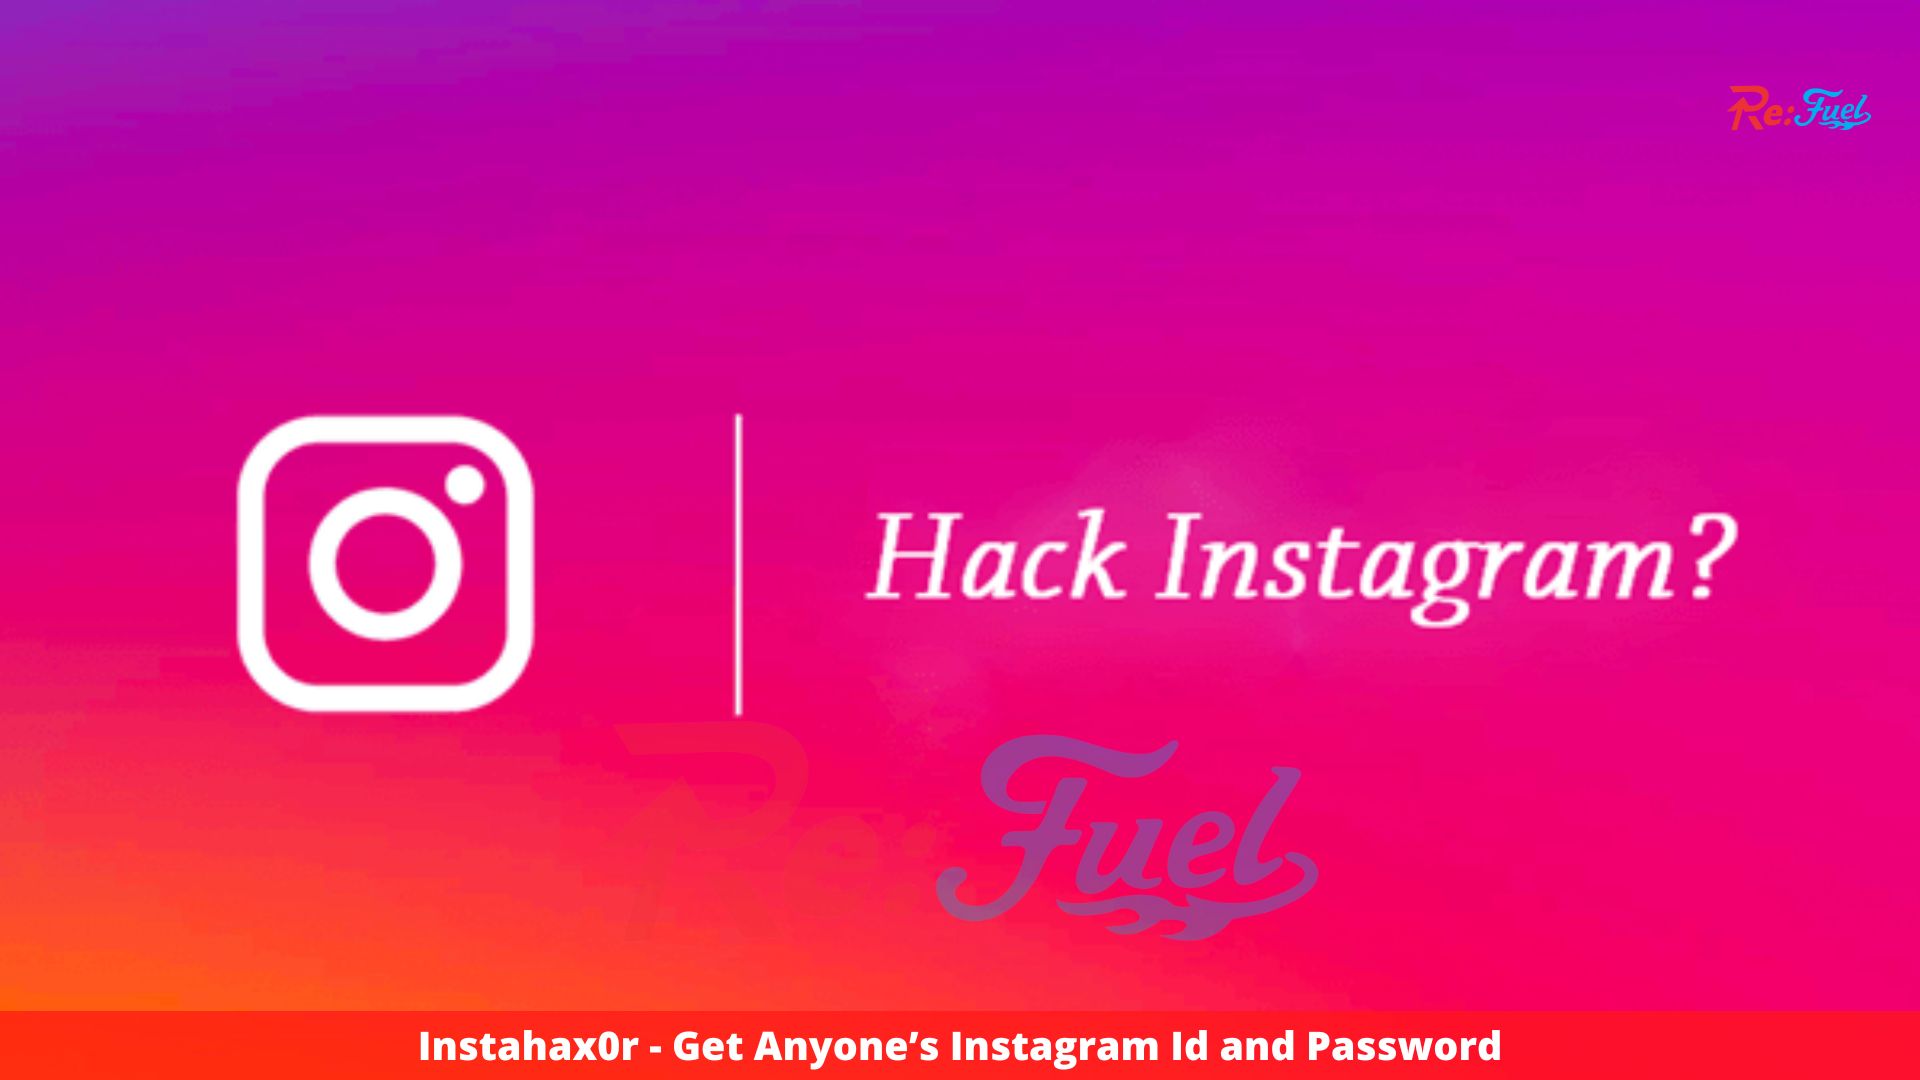 Instahax0r - Get Anyone’s Instagram Id and Password